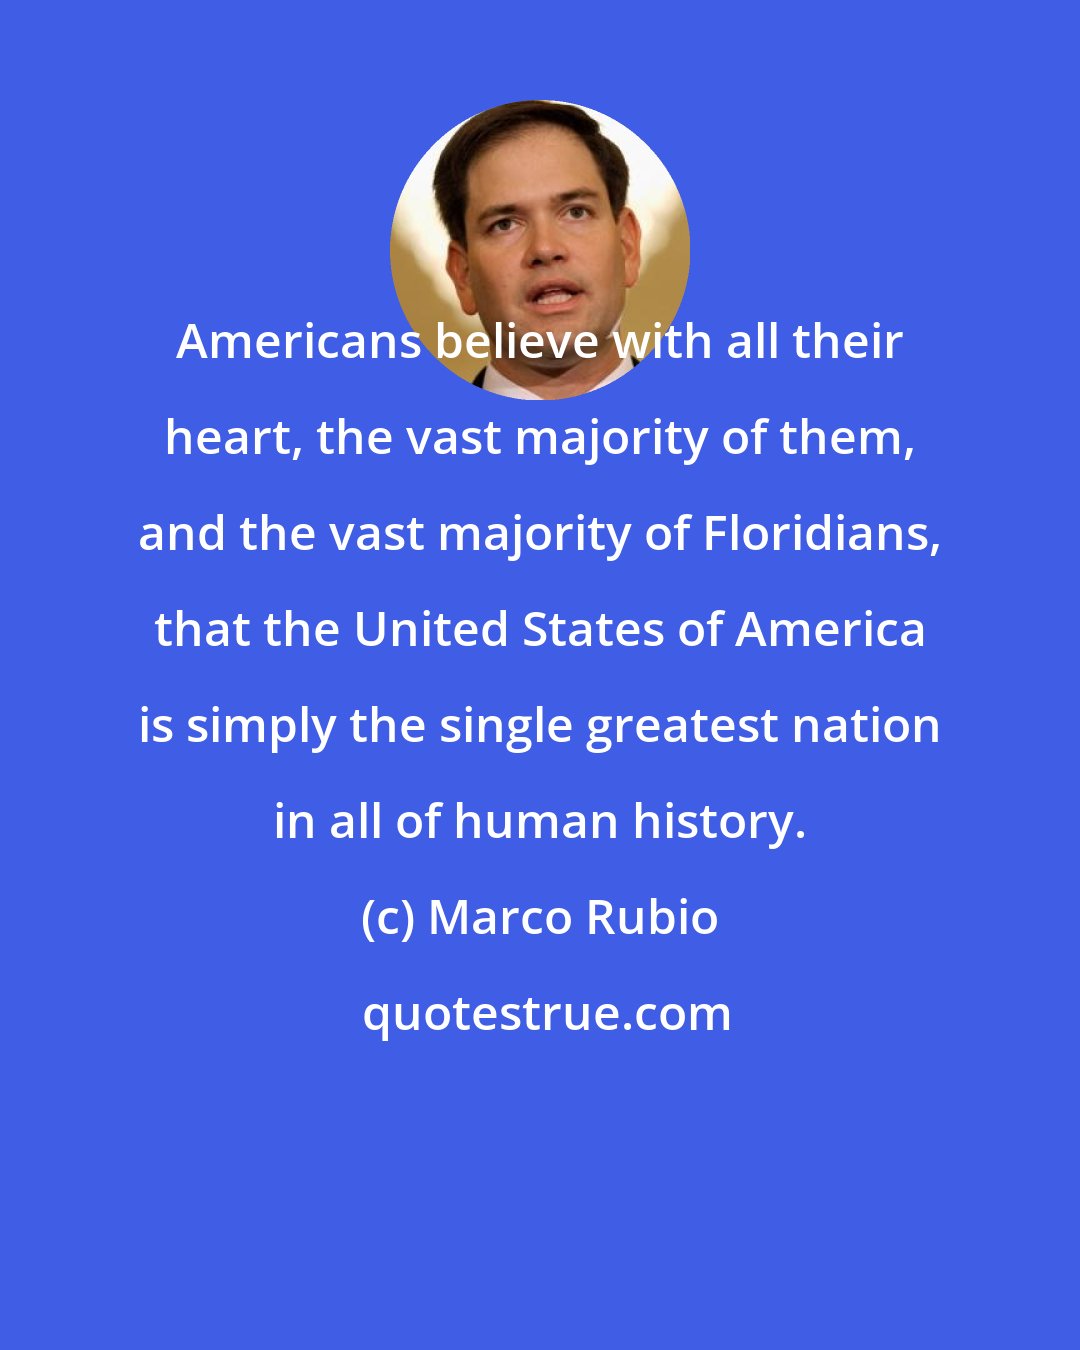 Marco Rubio: Americans believe with all their heart, the vast majority of them, and the vast majority of Floridians, that the United States of America is simply the single greatest nation in all of human history.